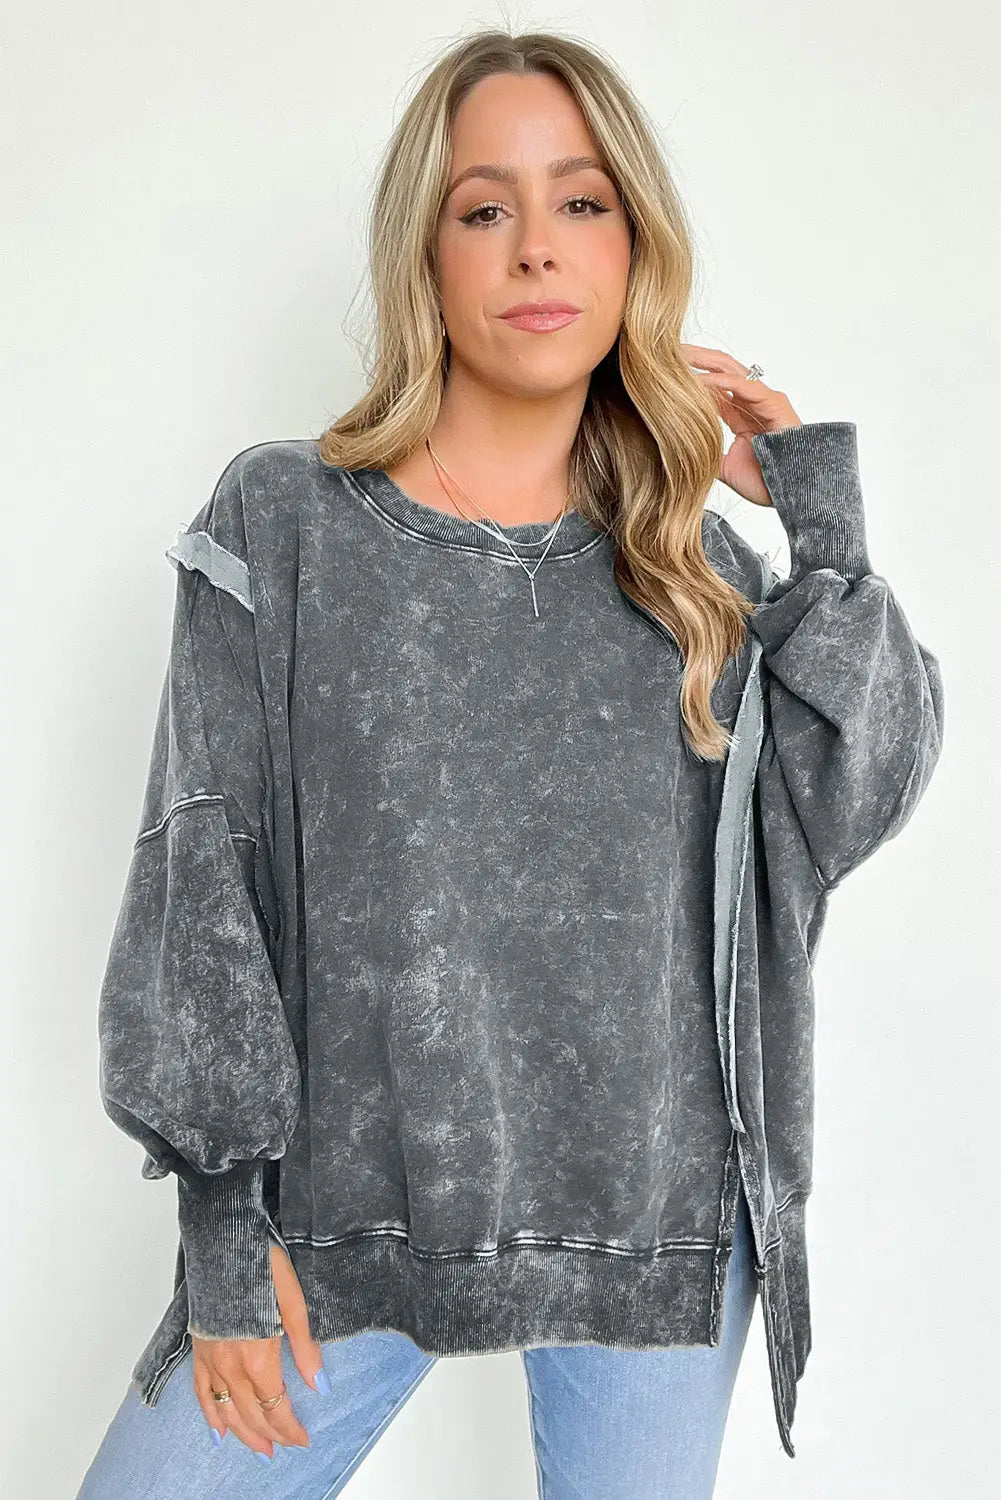 Gray acid wash relaxed fit seamed pullover sweatshirt with slits - sweatshirts & hoodies